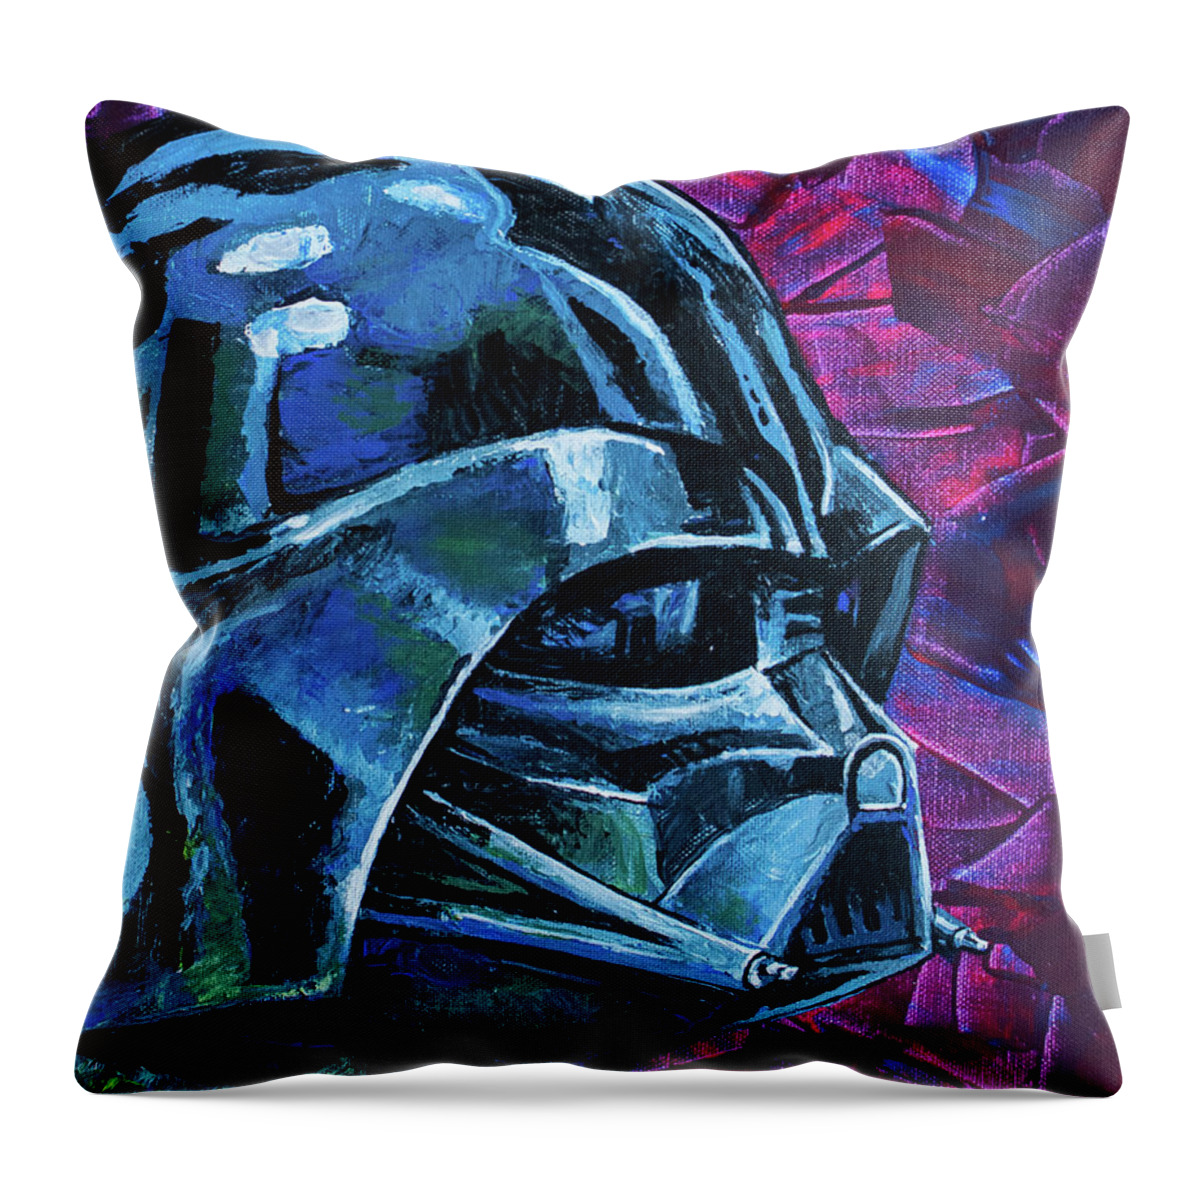 Star Wars Throw Pillow featuring the painting Darth Vader by Aaron Spong